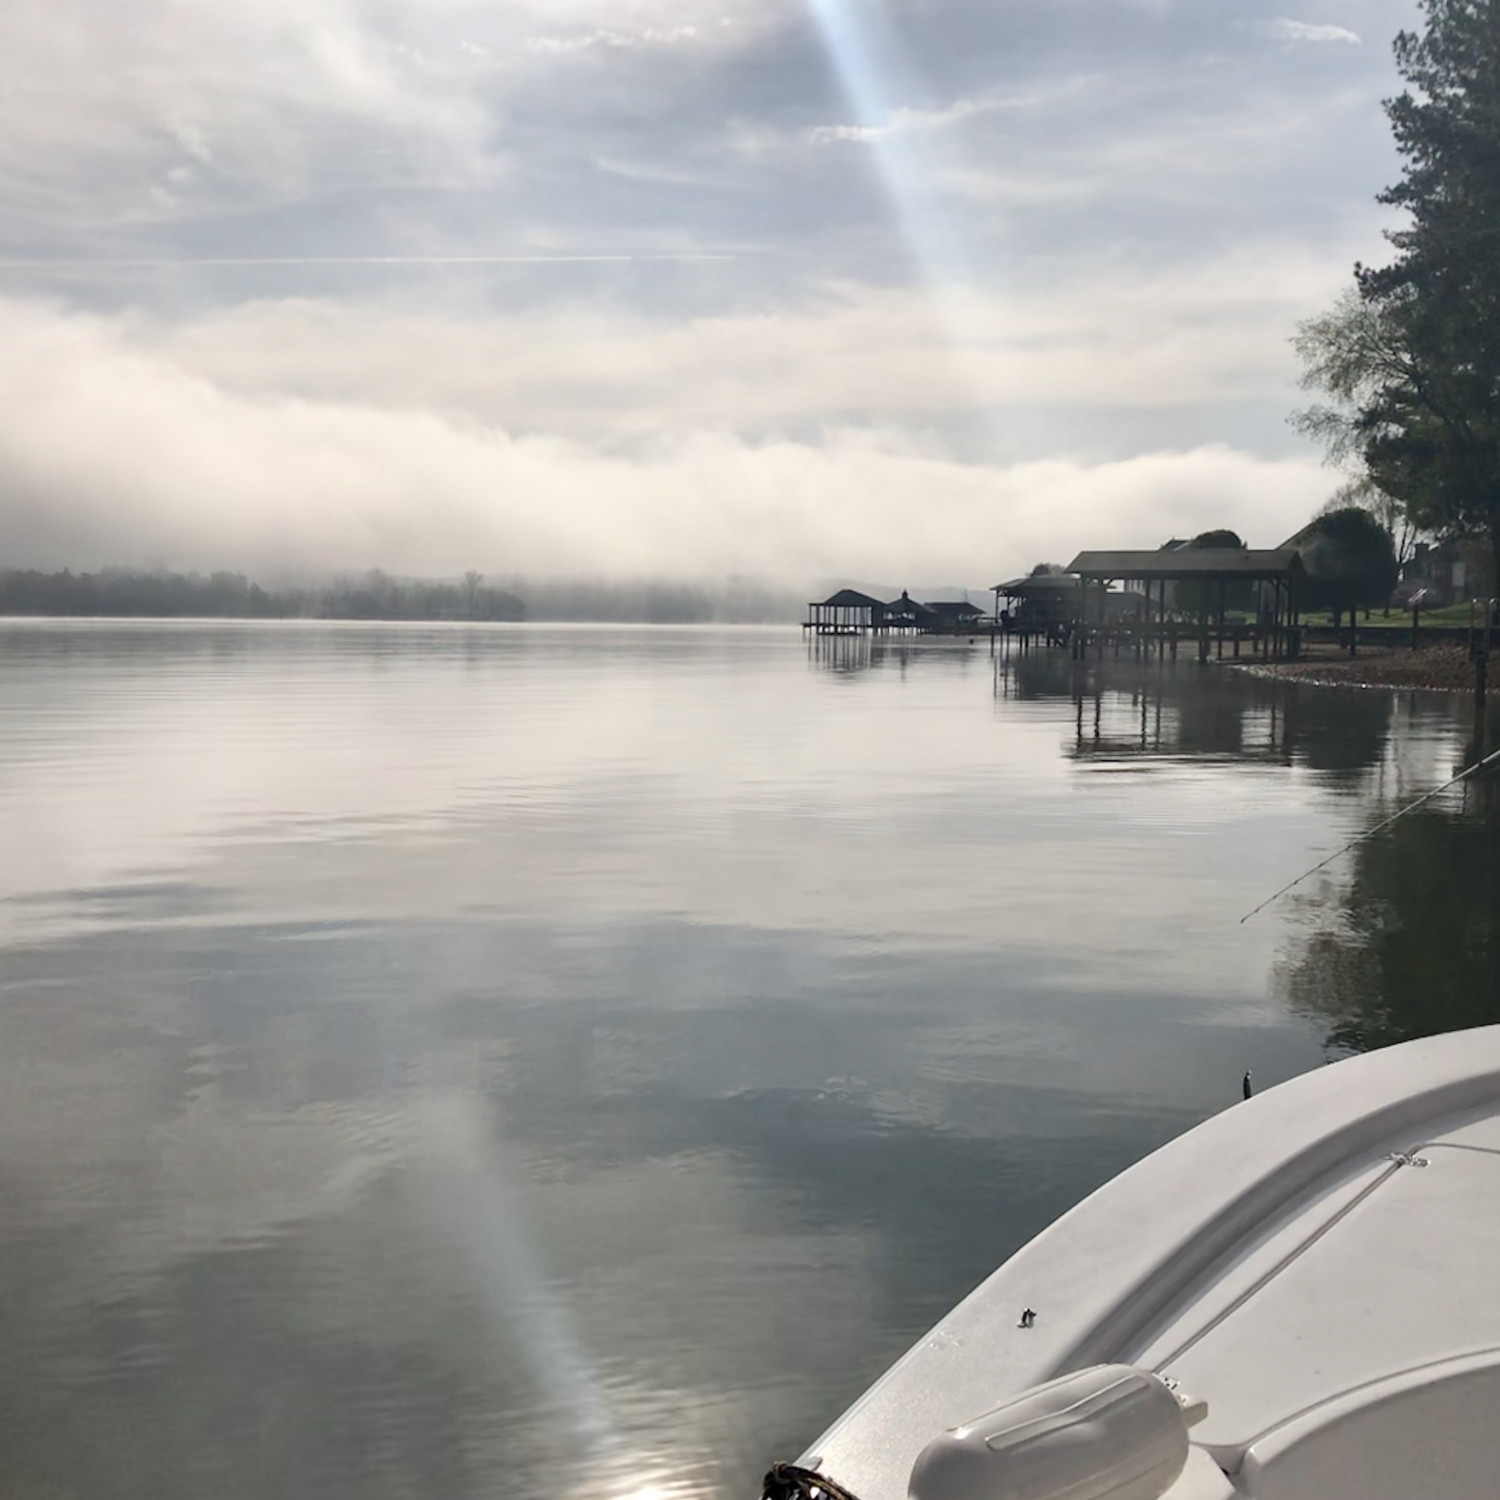 Maiden fishing voyage on the new Masters 207 with my daughter on a very foggy morning on Tellic...